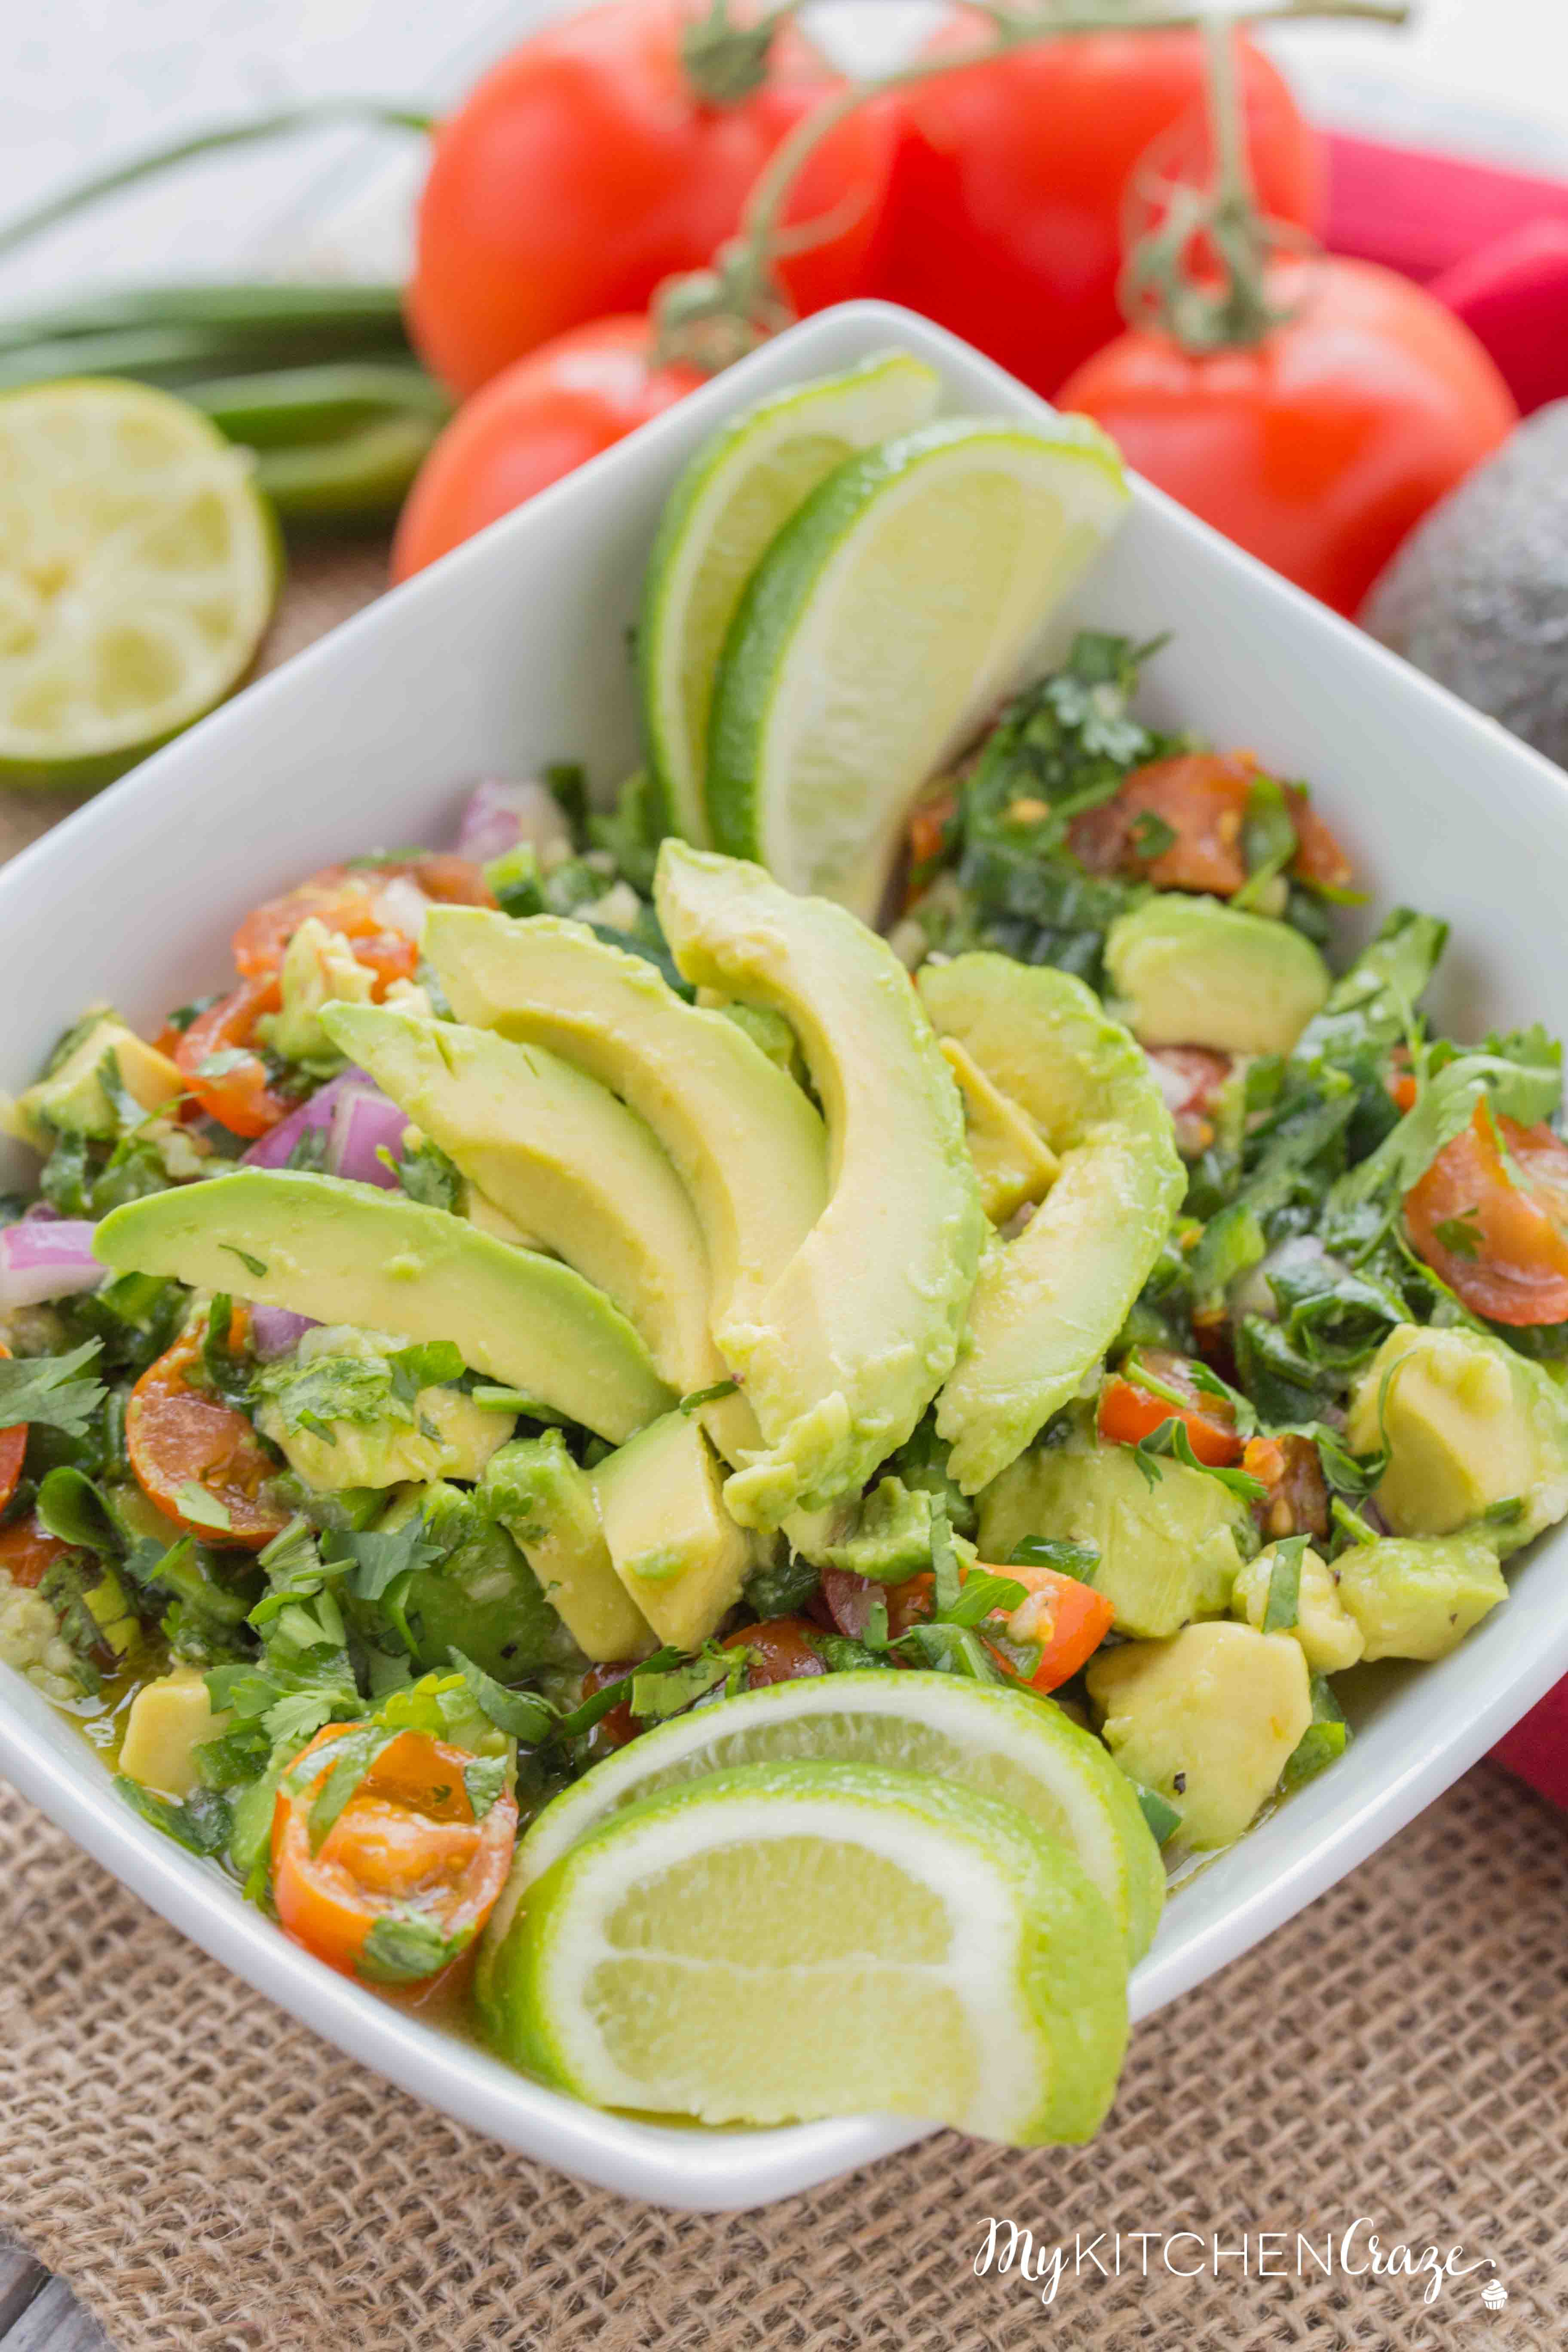 Avocado Salad ~ mykitchencraze.com ~ Enjoy this easy and refreshing Avocado Salad as a side dish or a main entree. Either way it's easy to make and tastes delicious!